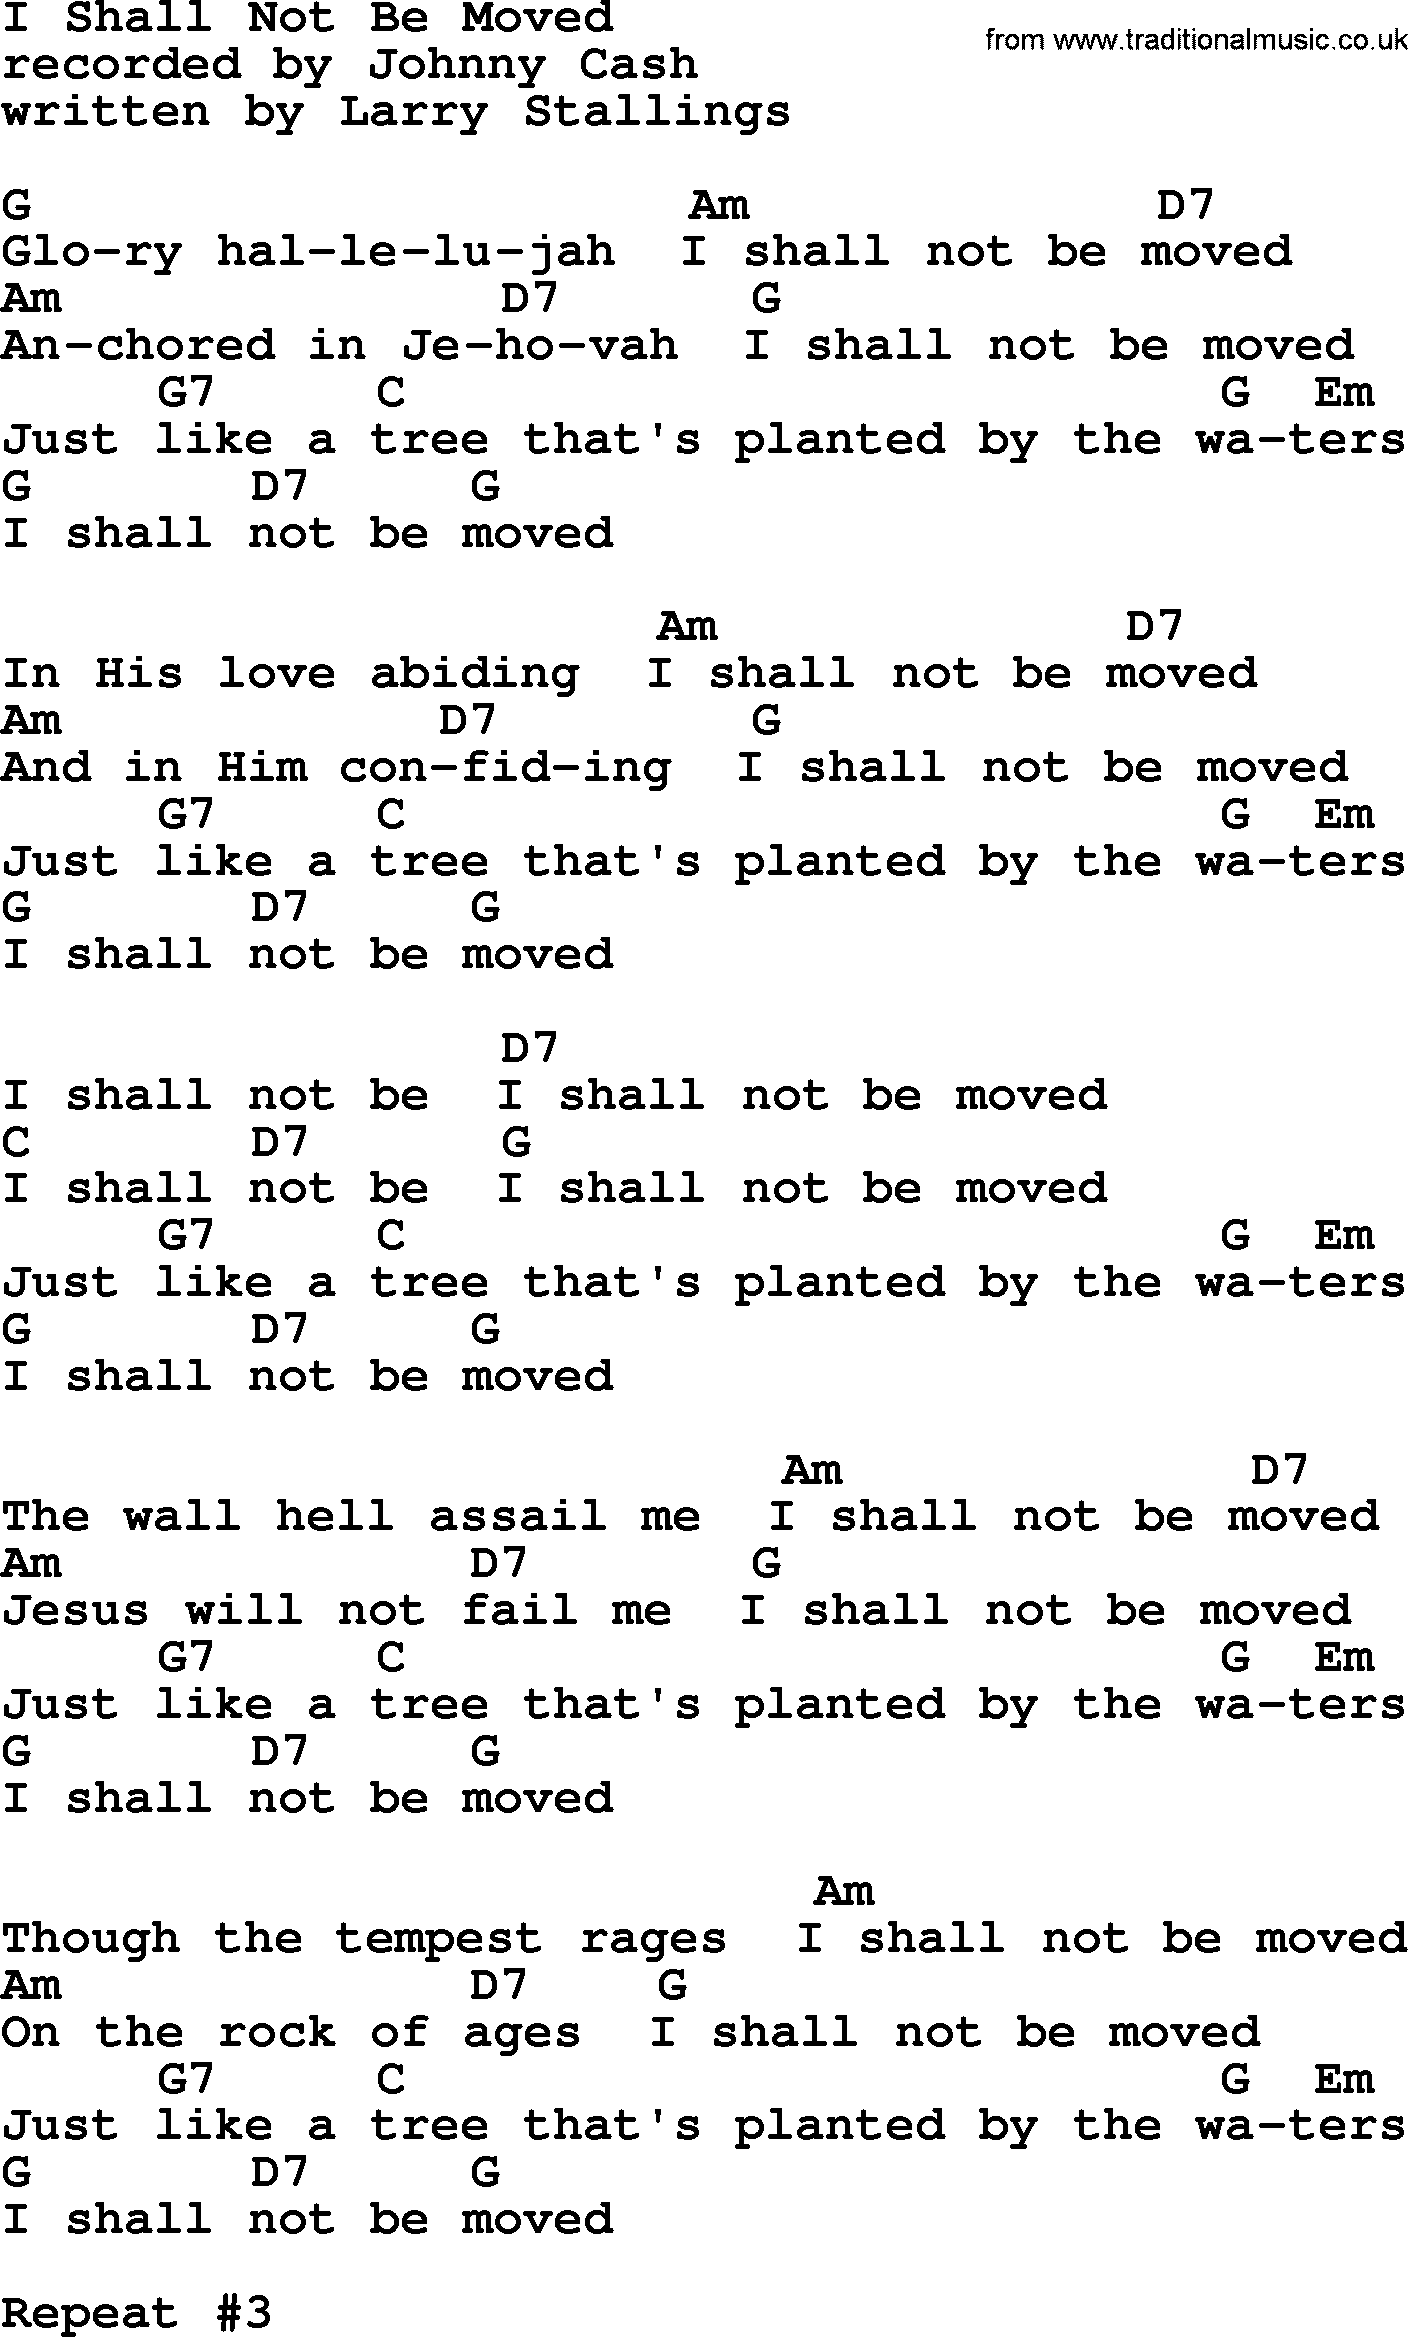 Johnny Cash song I Shall Not Be Moved, lyrics and chords